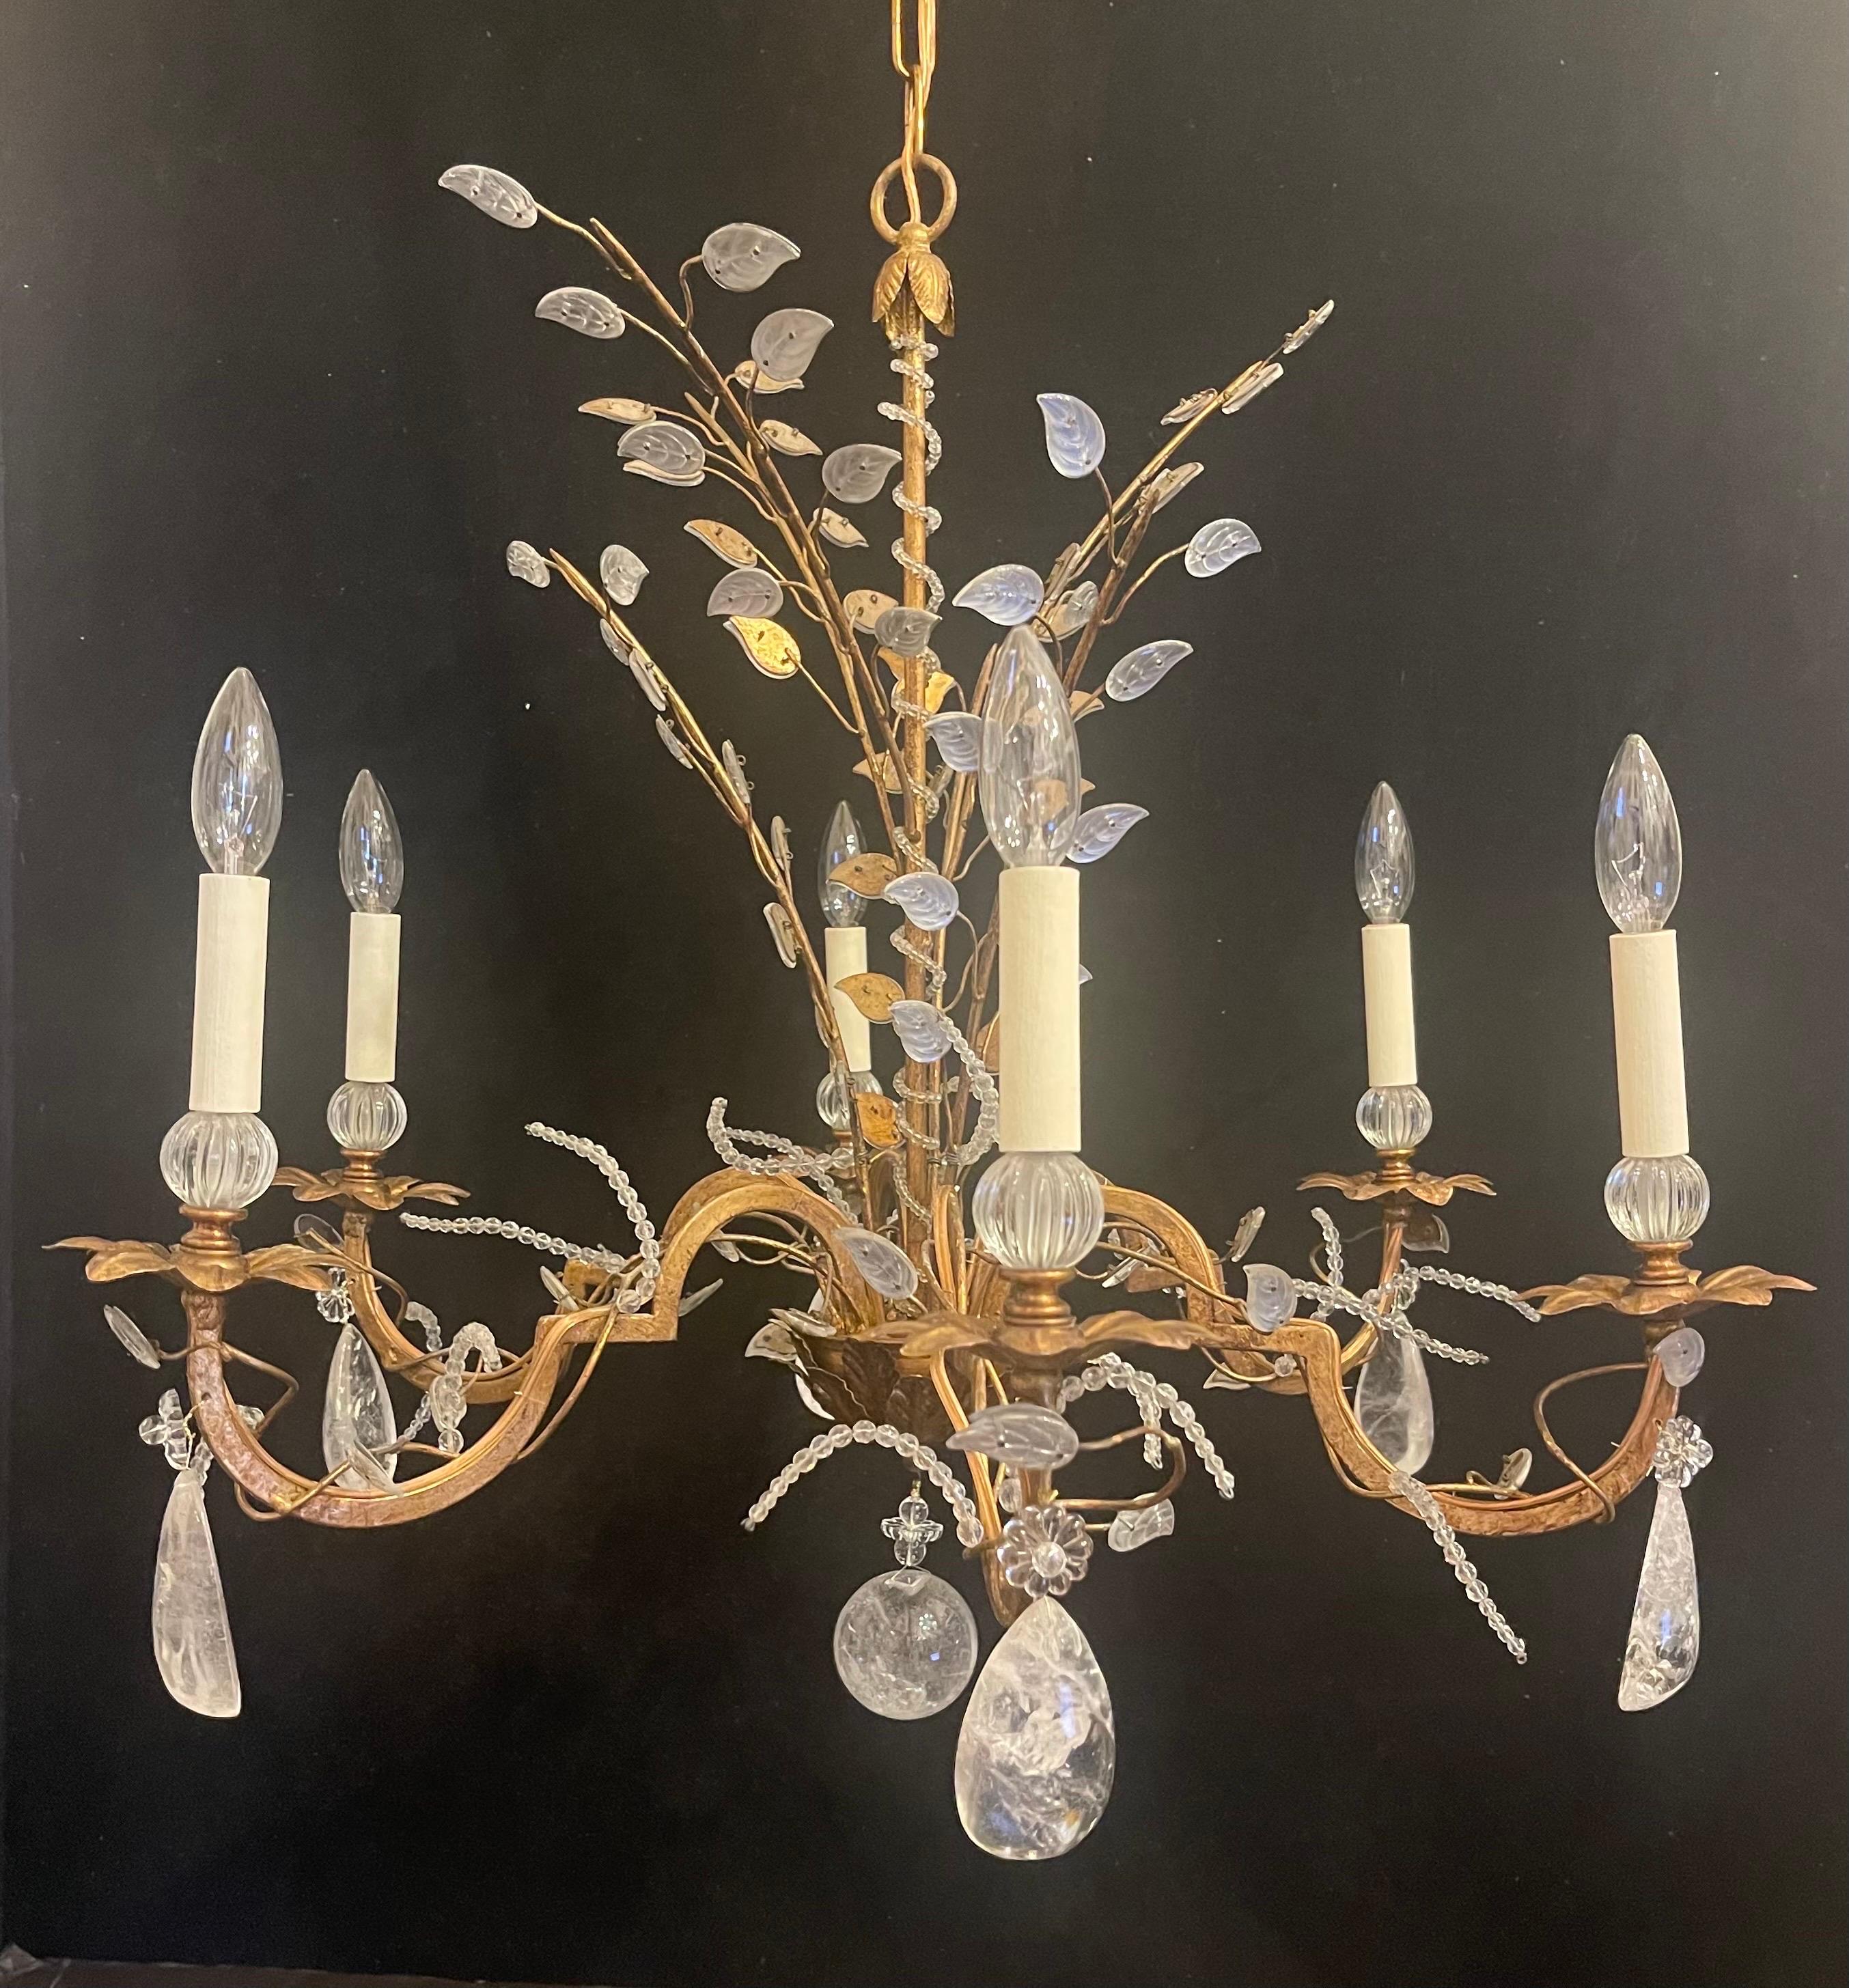 A beautiful gold gilt with rock crystal and crystal leaf basket spray form chandelier by Vaughan designs England, in the manner of Maison Baguès & Jansen with 6 candelabra lights each taking a max of 40 watts per socket.